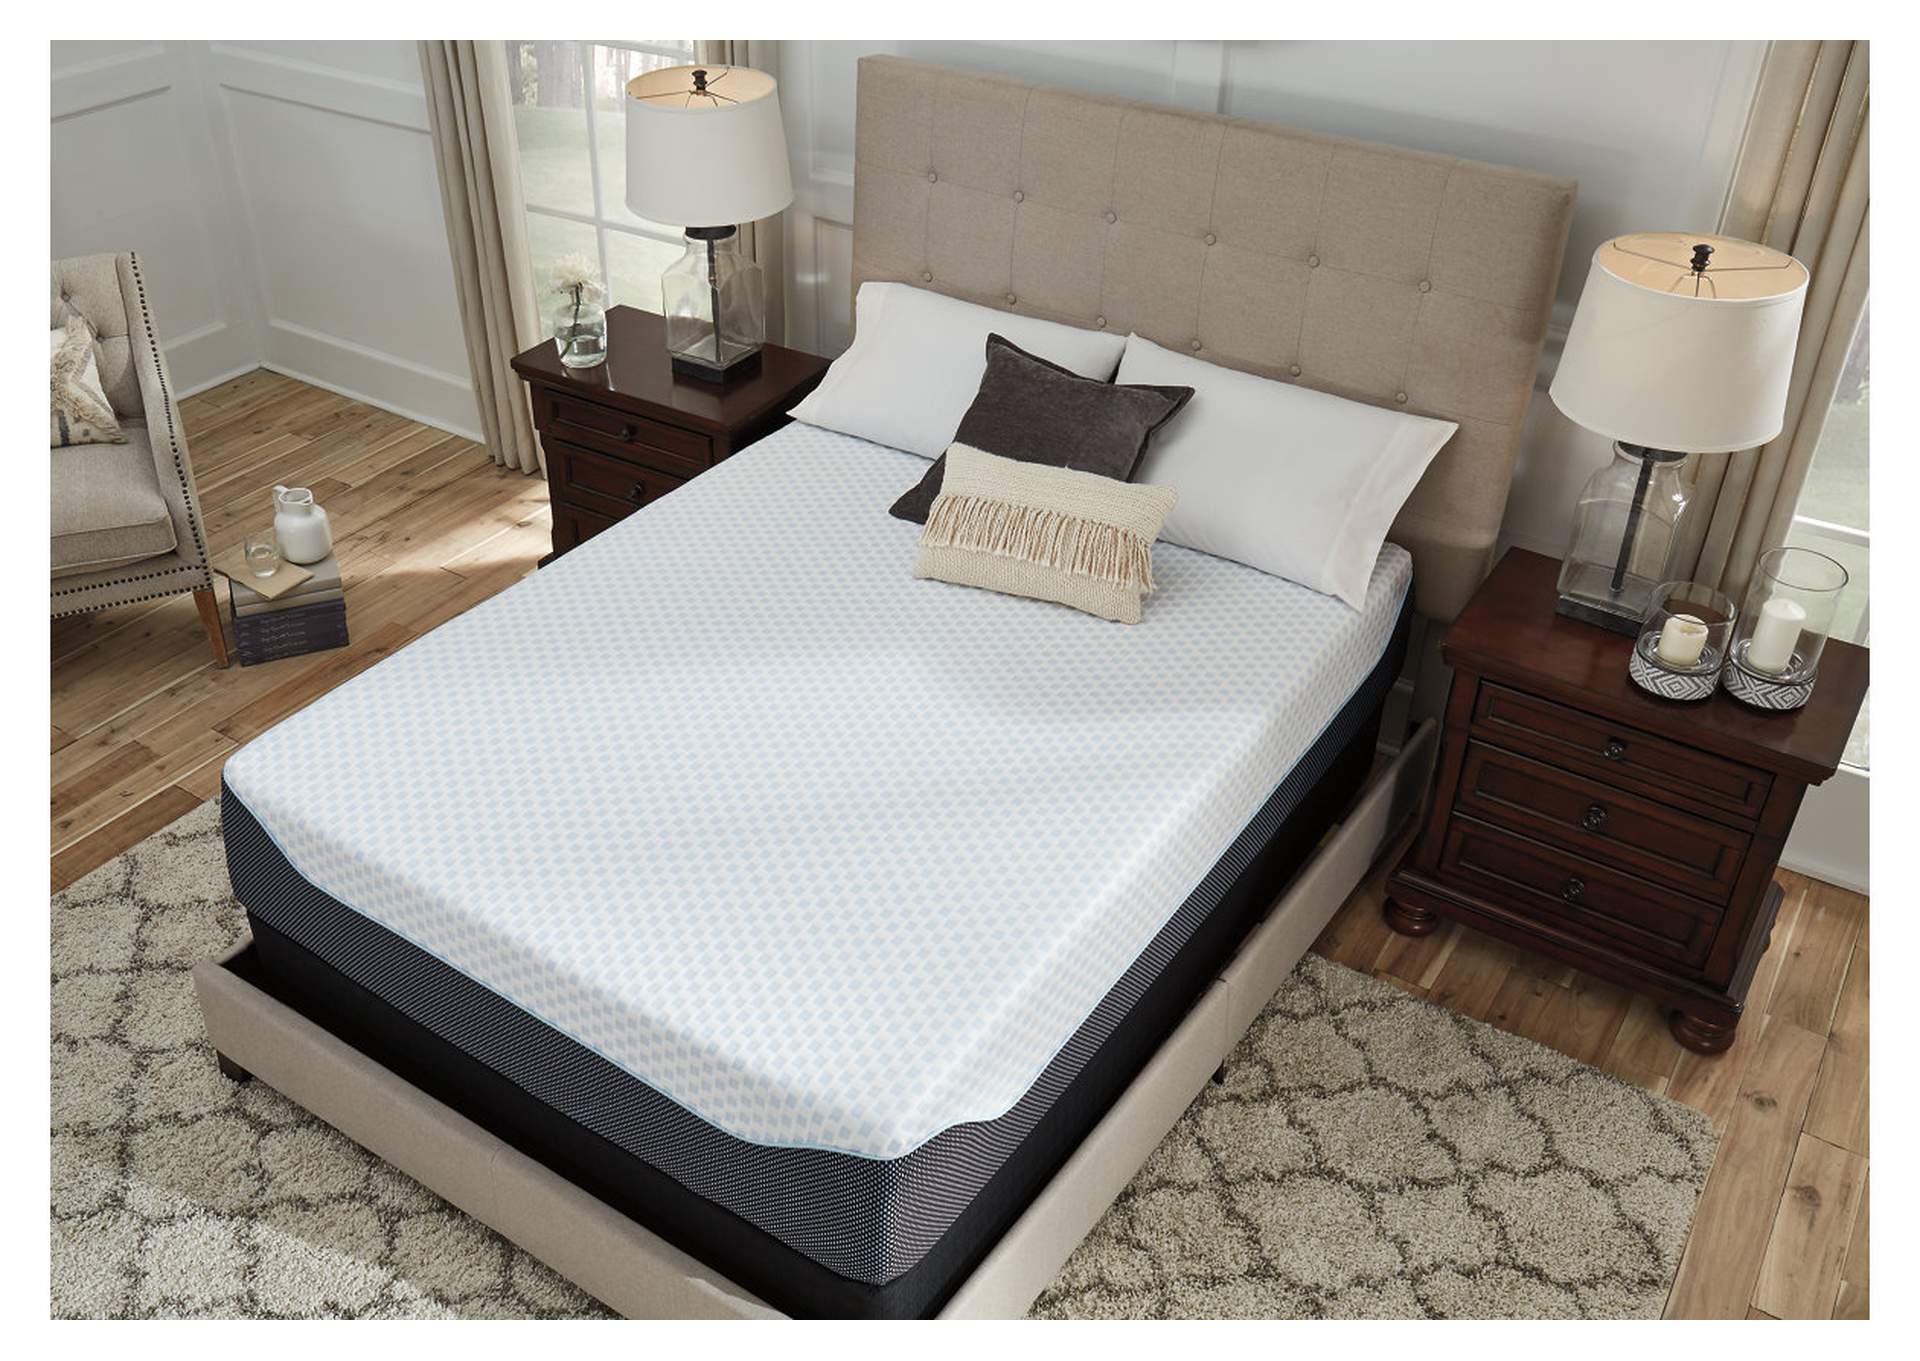 14 Inch Chime Elite King Memory Foam Mattress in a Box,Direct To Consumer Express